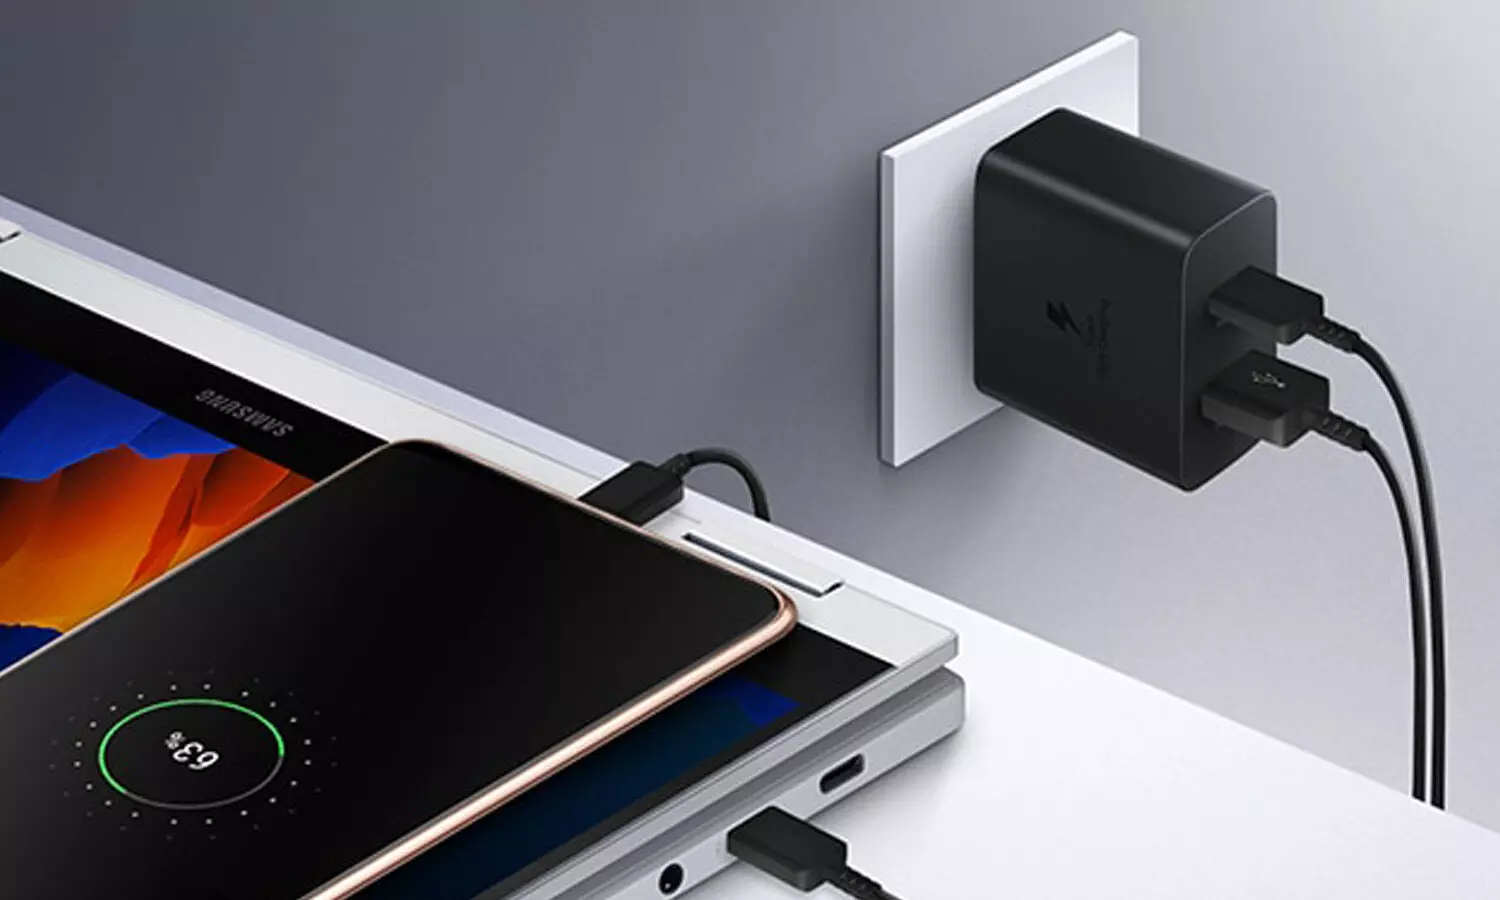 Samsung launches 35W Power Adapter in India, Check details here